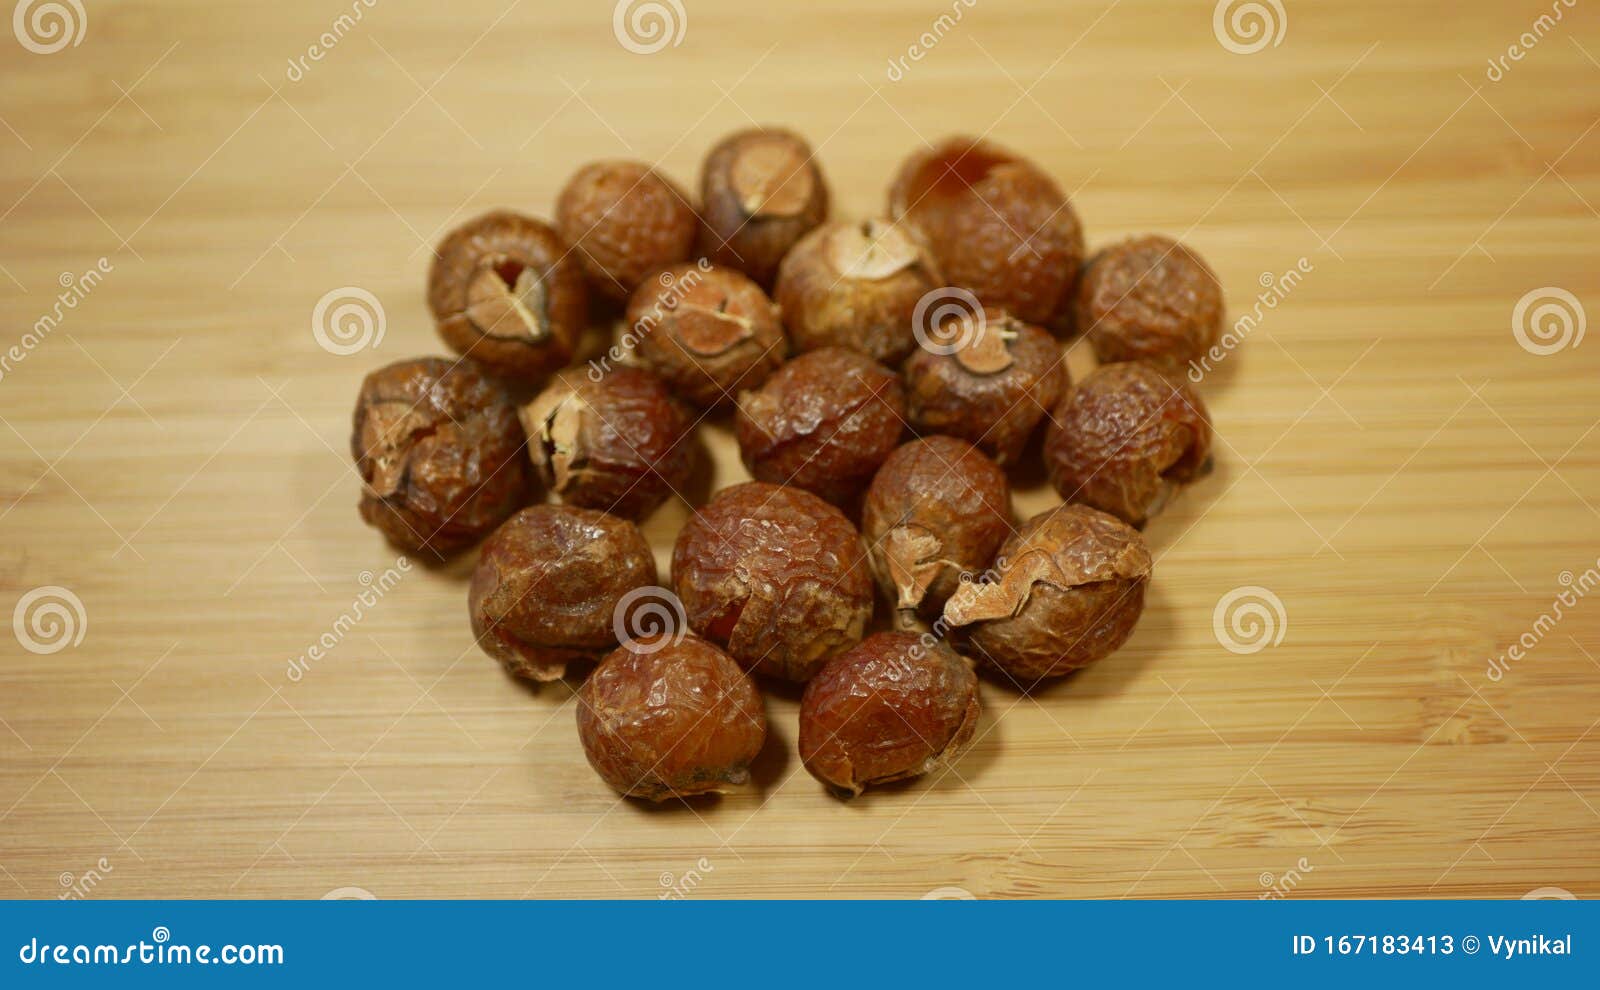 soap nuts indian soapberry or washnut, sapindus mukorossi reetha or ritha from the soap tree shells are used to wash